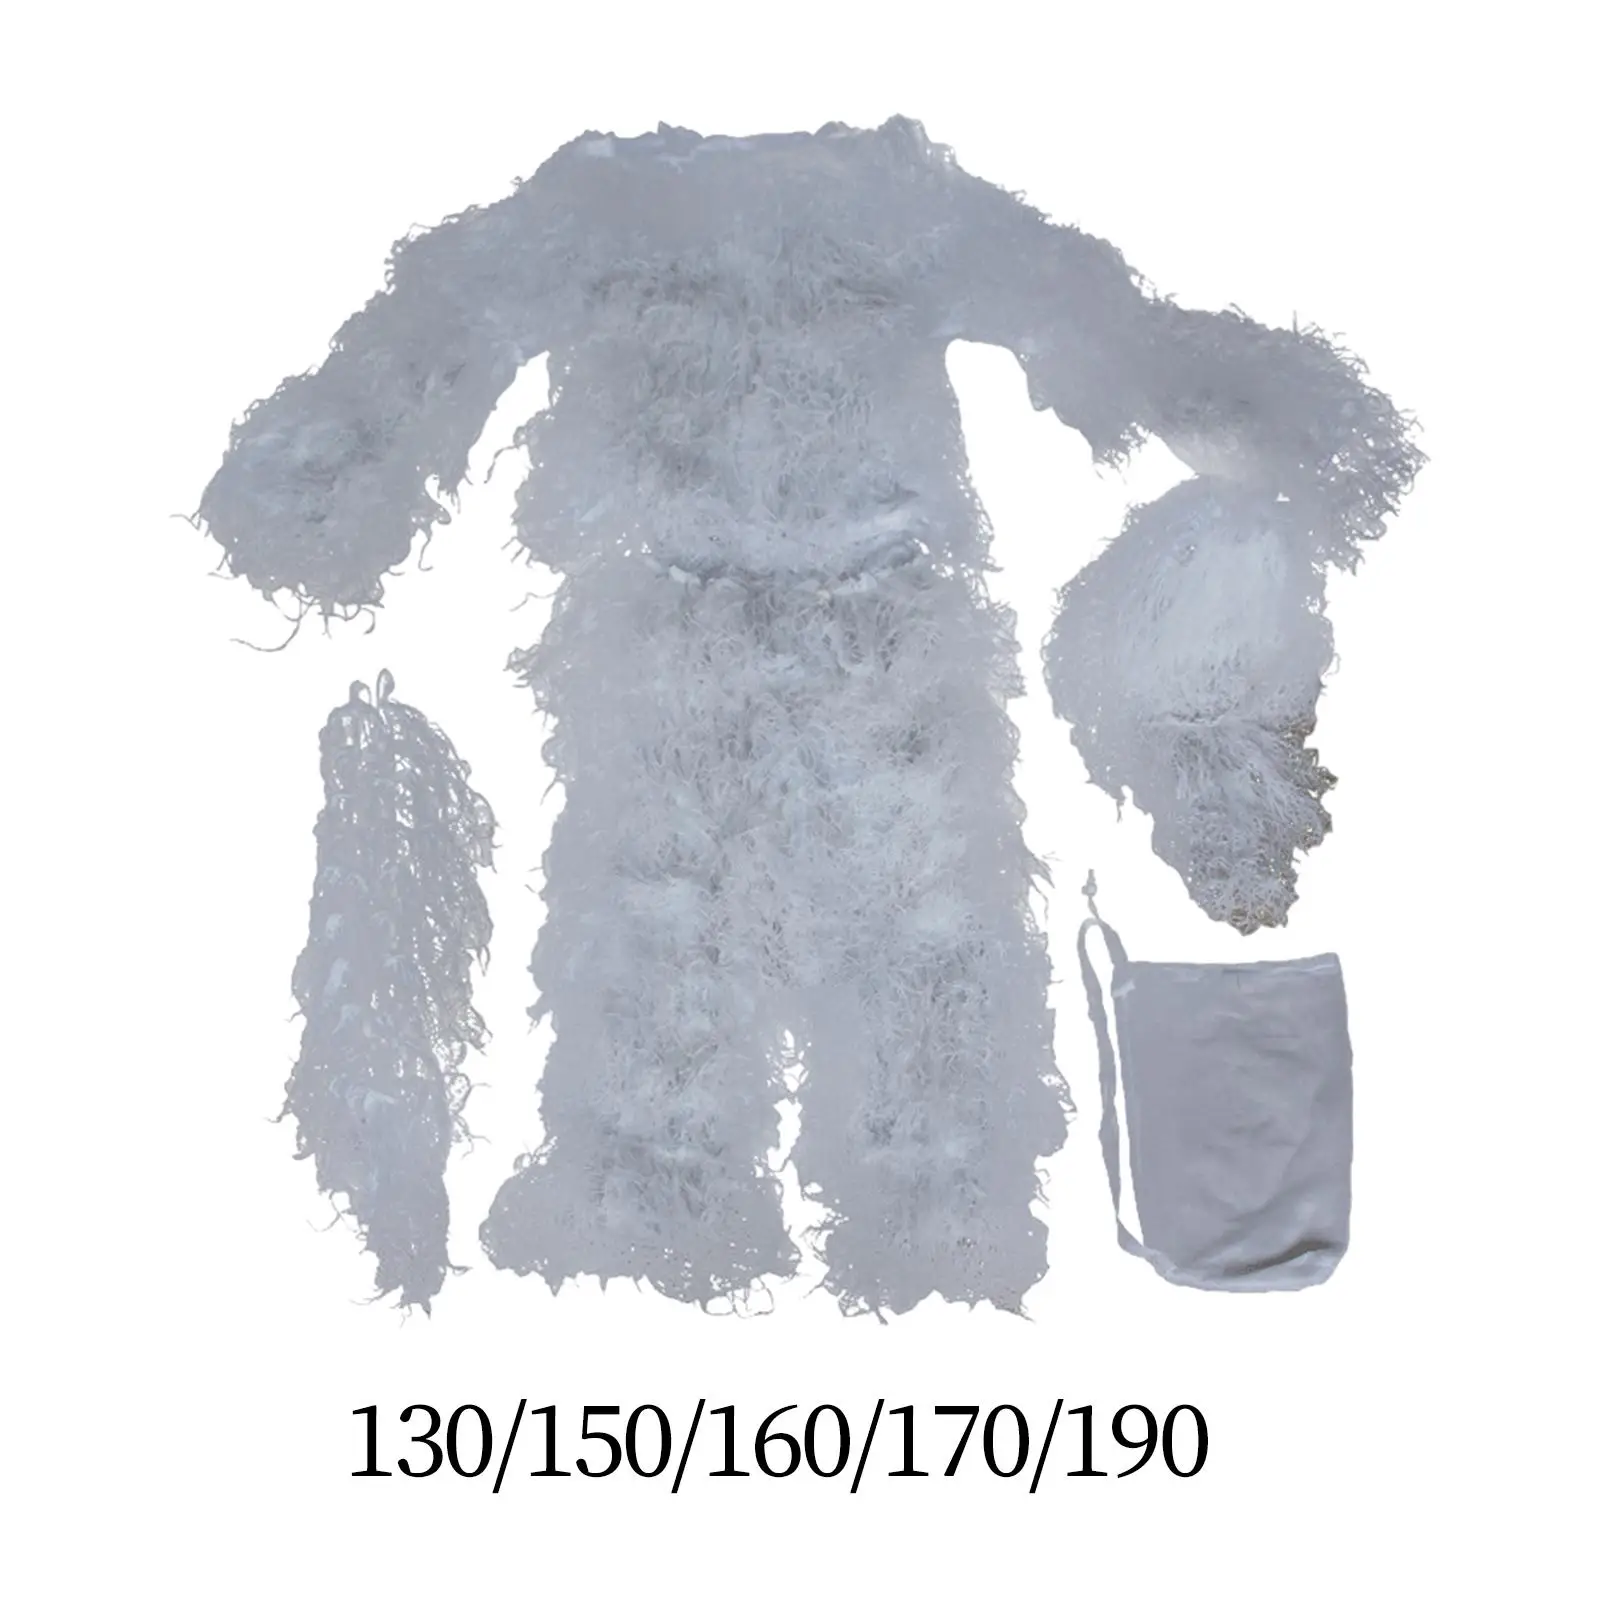 Ghillie Suit Snow Outfit Lightweight Gilly Suit Hunting suits for Turkey Hunting Photography Outdoor Bird Watching